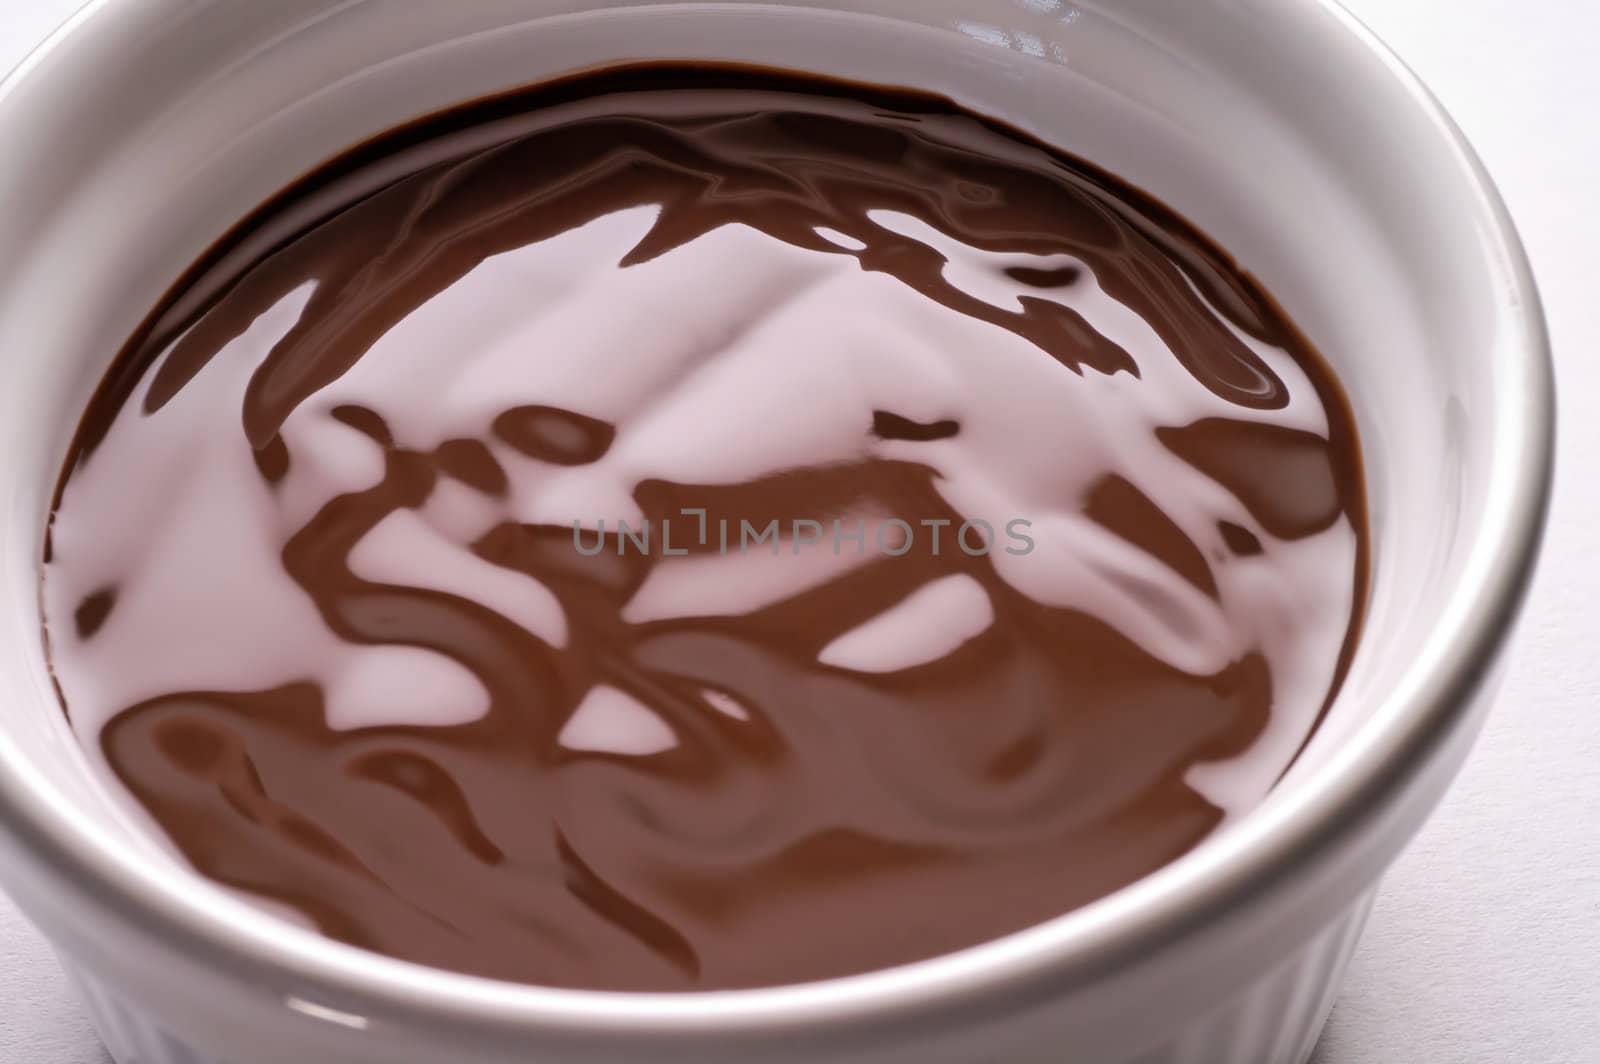 Chocolate cream cup closeup (2) by Laborer